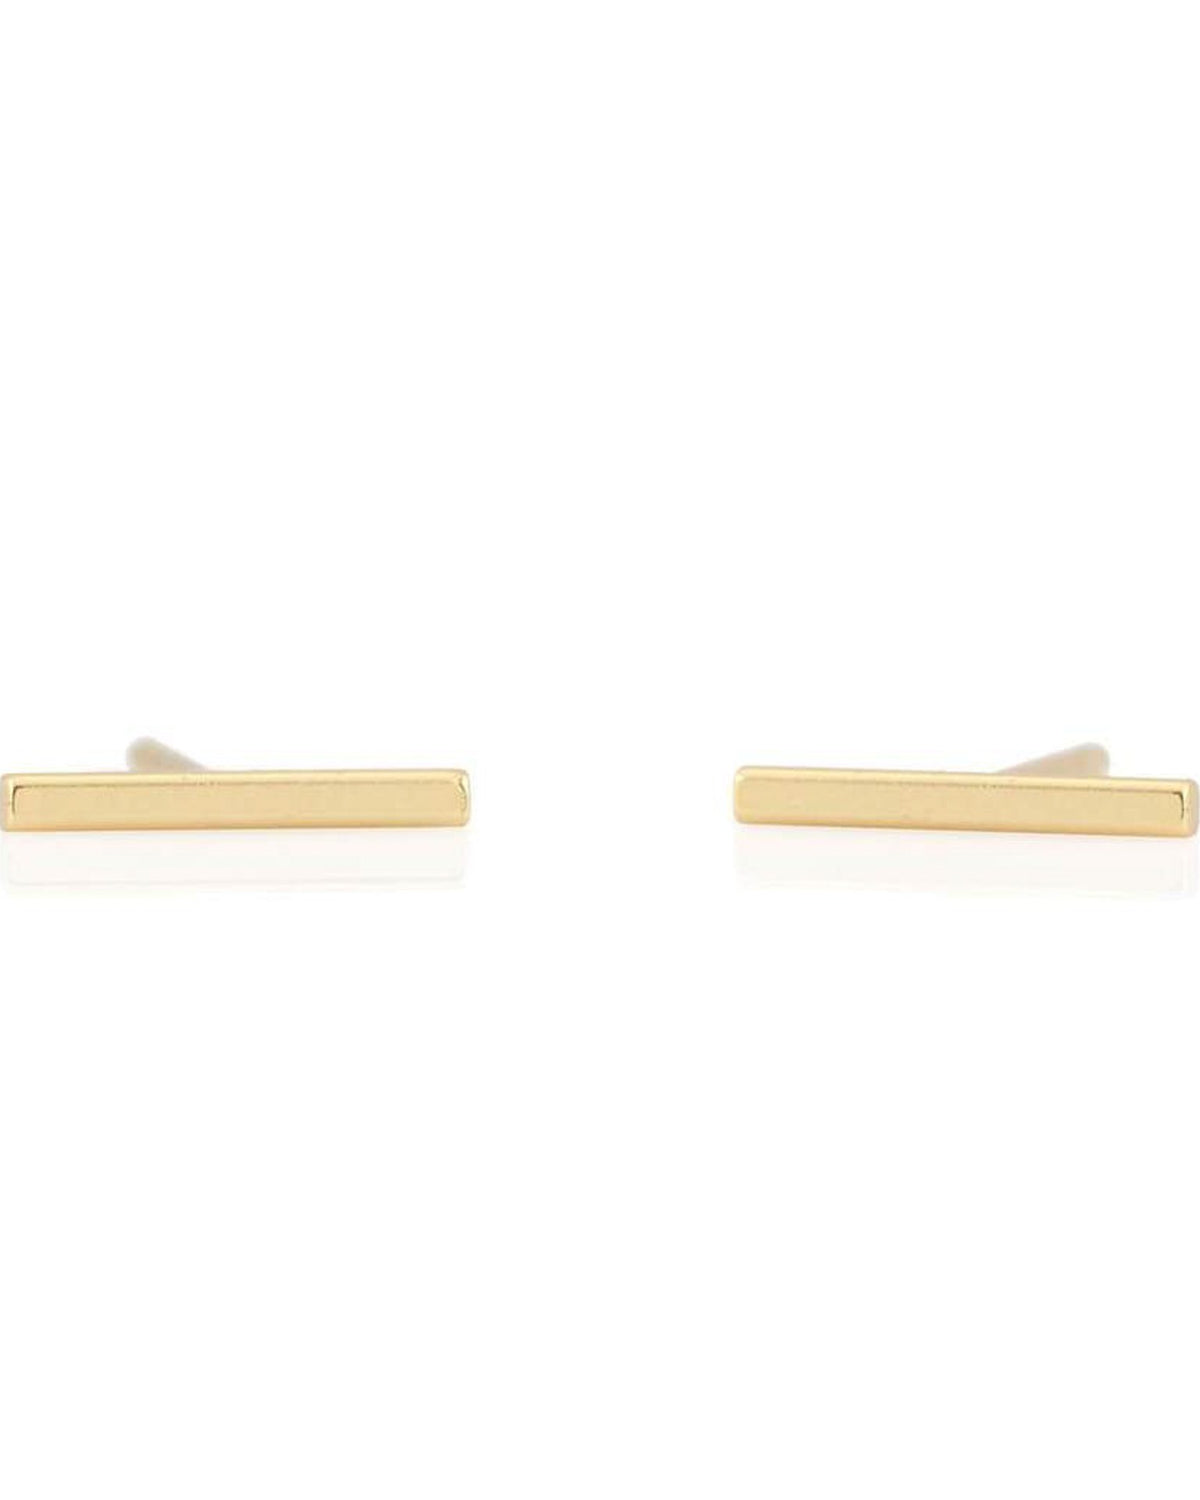 Kris Nations Jewelry O/S / Gold Dash Earrings in Gold